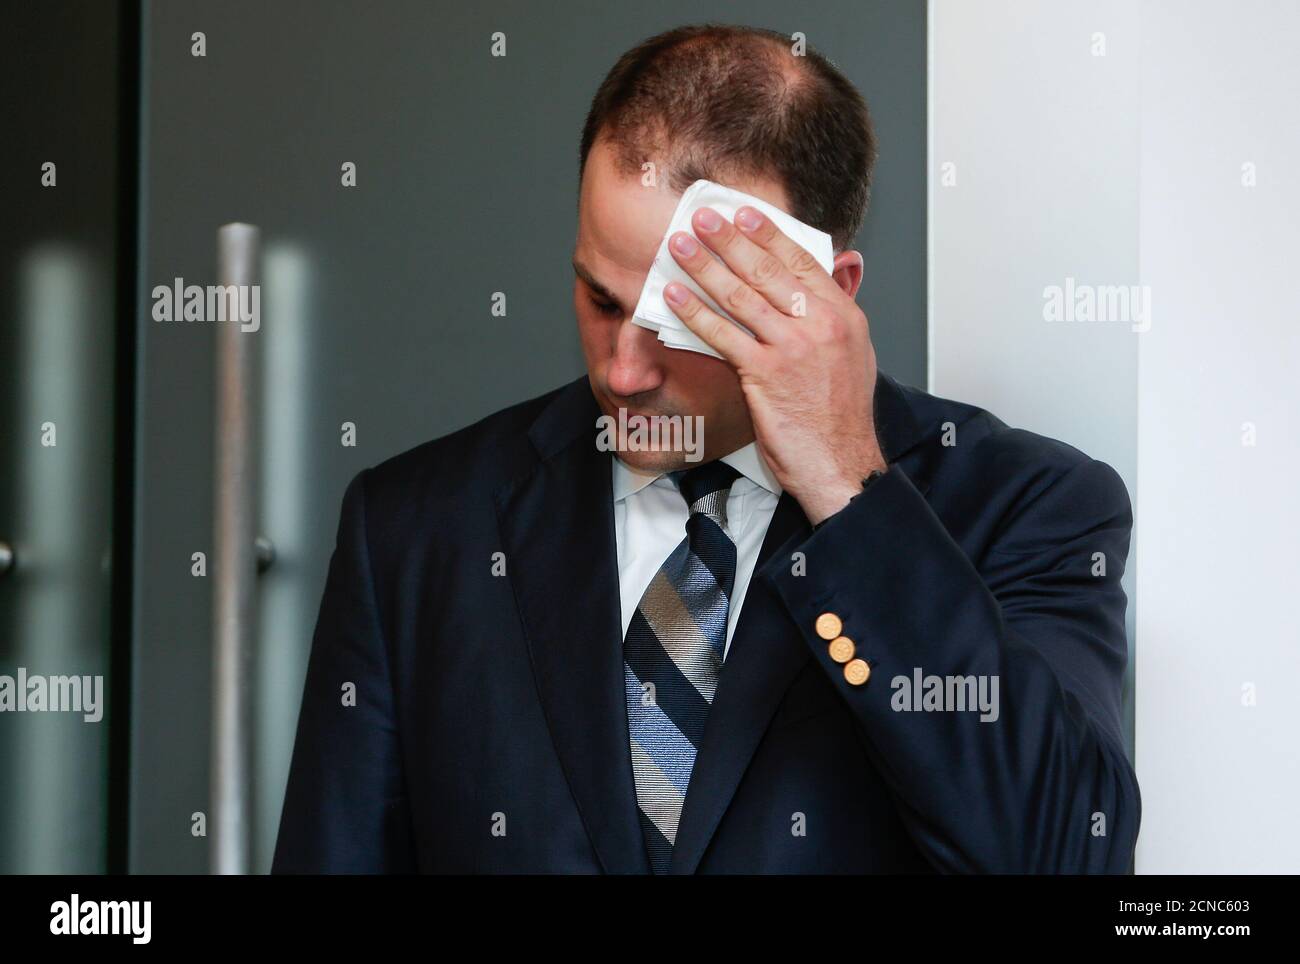 Michael Kobold, spokesperson of Gandolfini family, wipes his forehead during a news conference about James Gandolfini's death in Rome June 20, 2013. Gandolfini, the burly actor best known for his Emmy-winning portrayal of a conflicted New Jersey mob boss in the groundbreaking TV series 'The Sopranos,' died on Wednesday vacationing in Italy. He was 51. REUTERS/Yara Nardi (ITALY - Tags: OBITUARY ENTERTAINMENT) Stock Photo